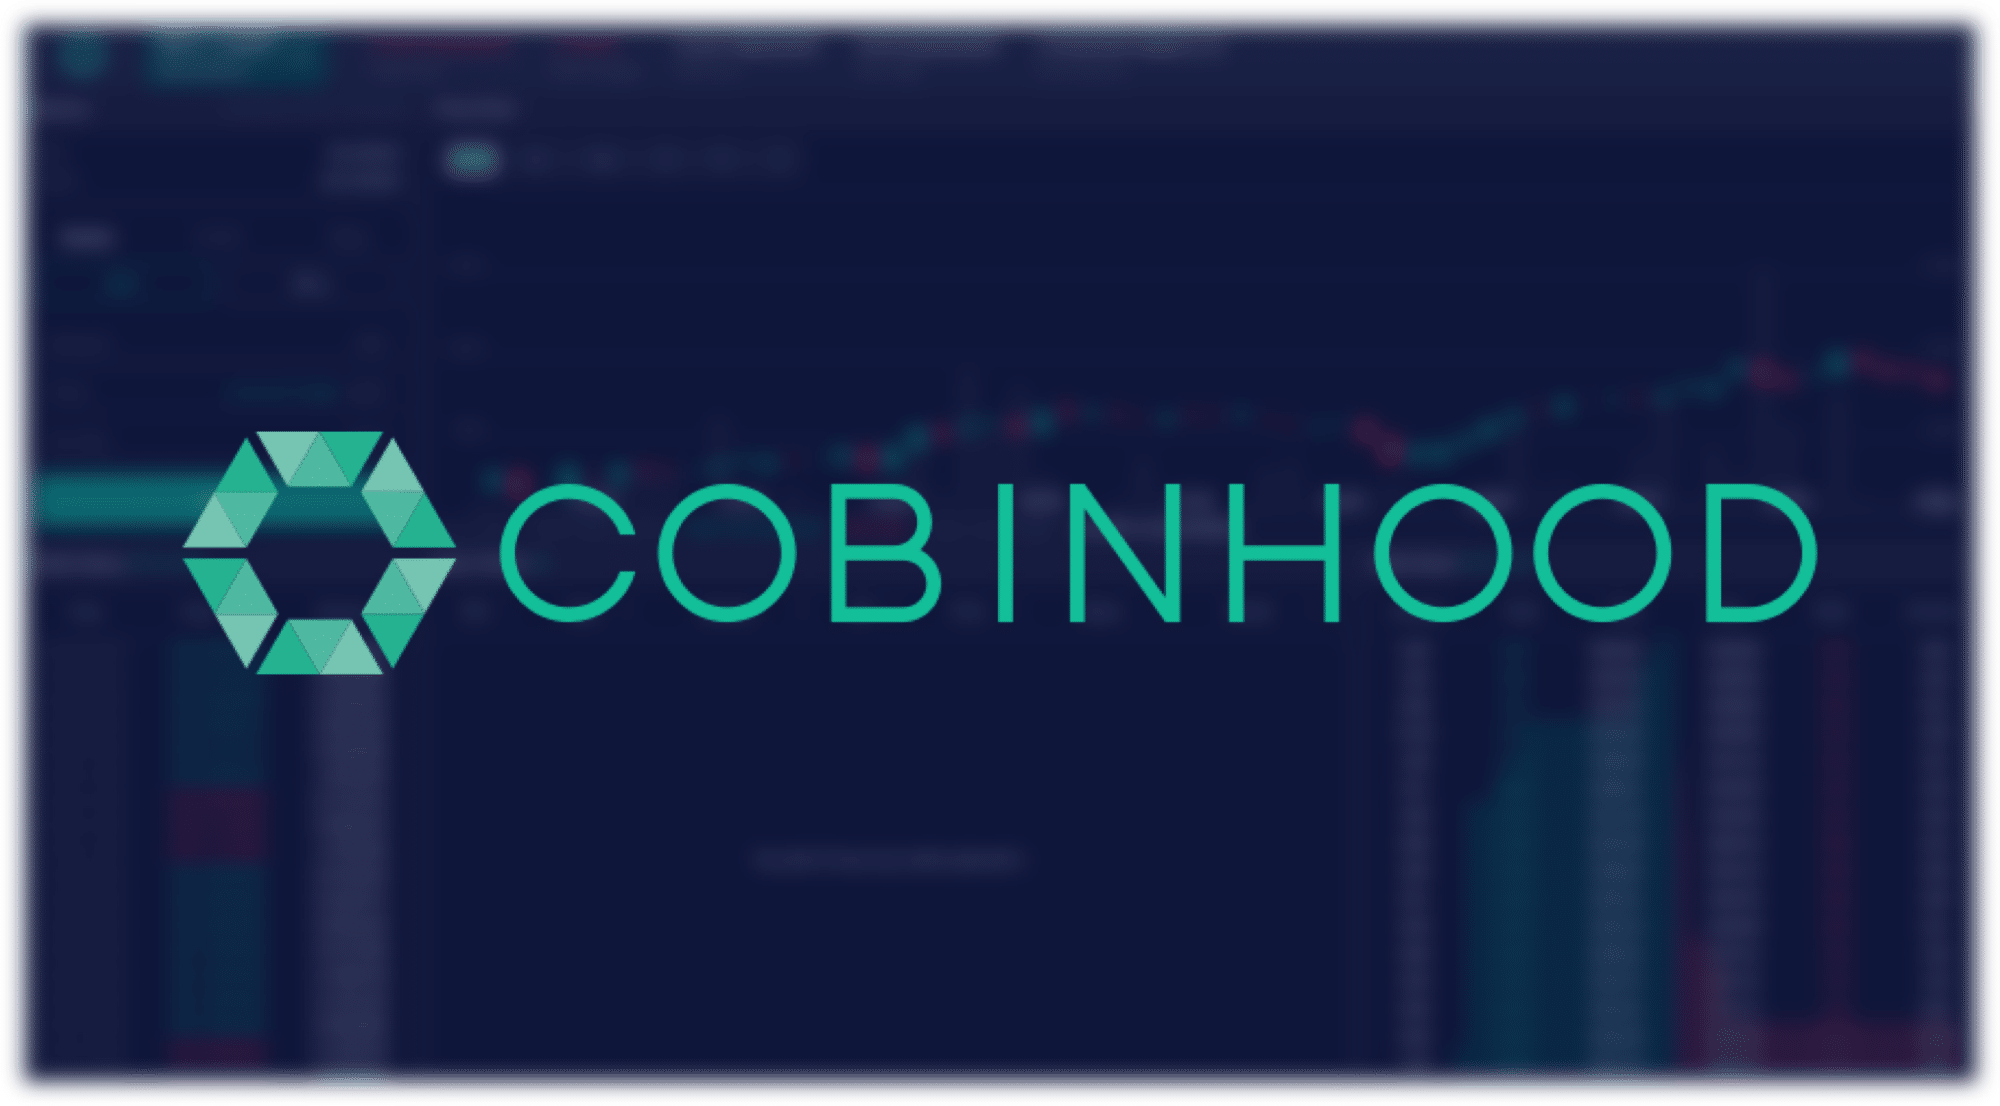 Cobinhood Review - Are Zero Fee Business Models Sustainable in Crypto?